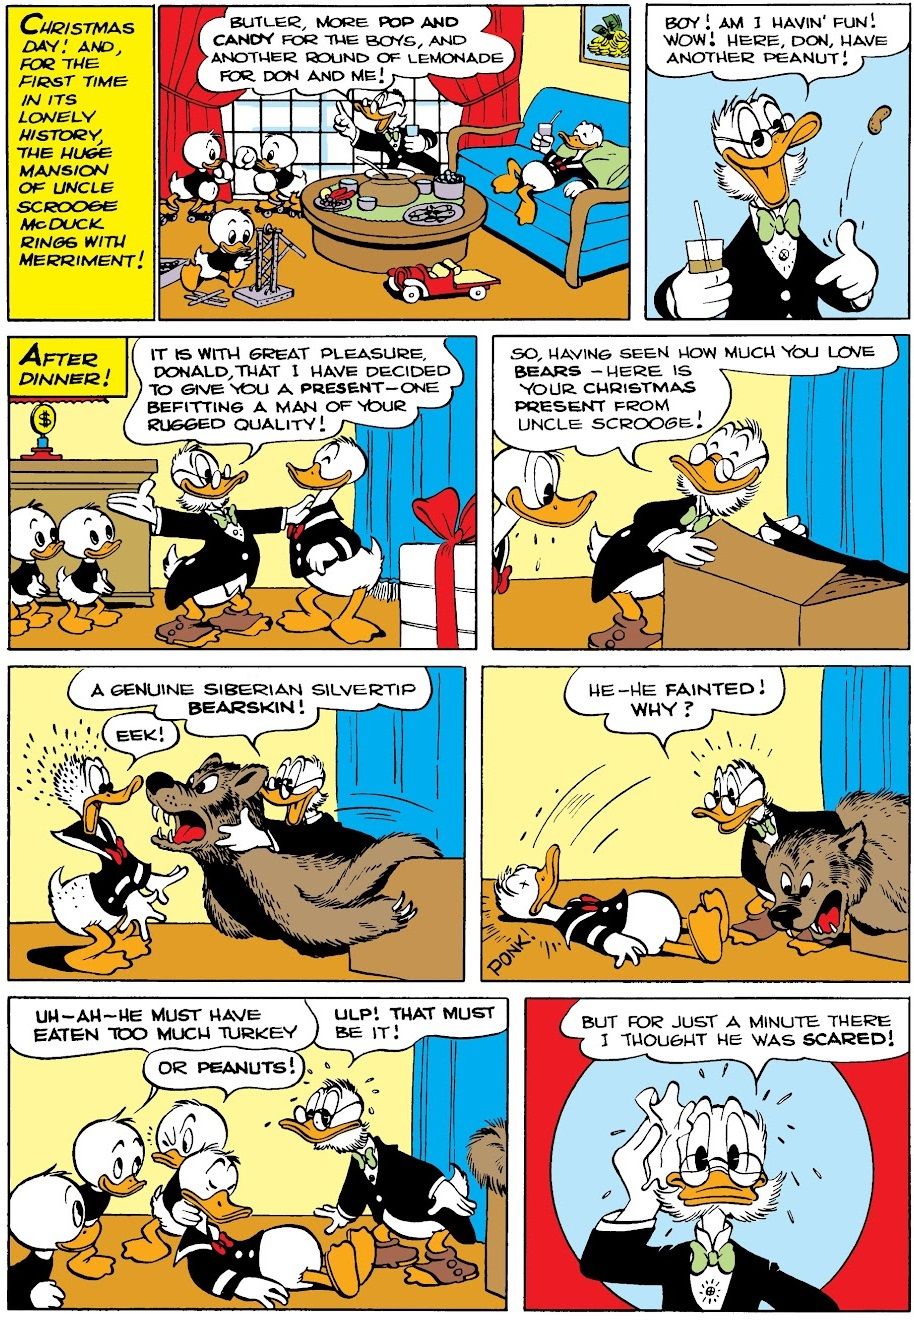 Donald Duck won Uncle Scrooge's admiration